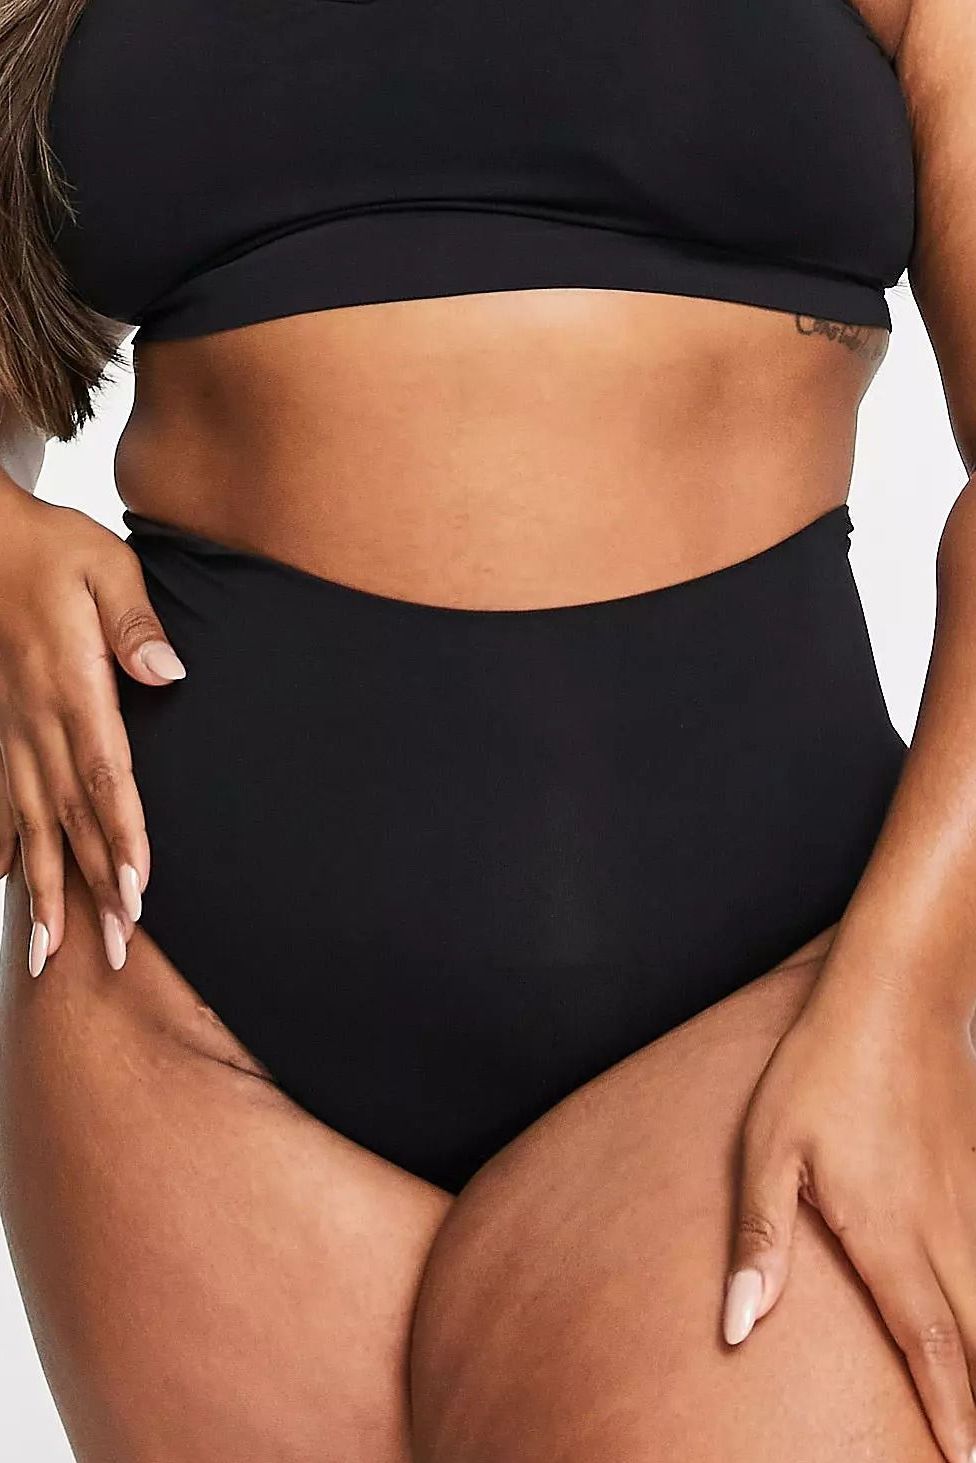 Spanx Curve higher power shorts in black